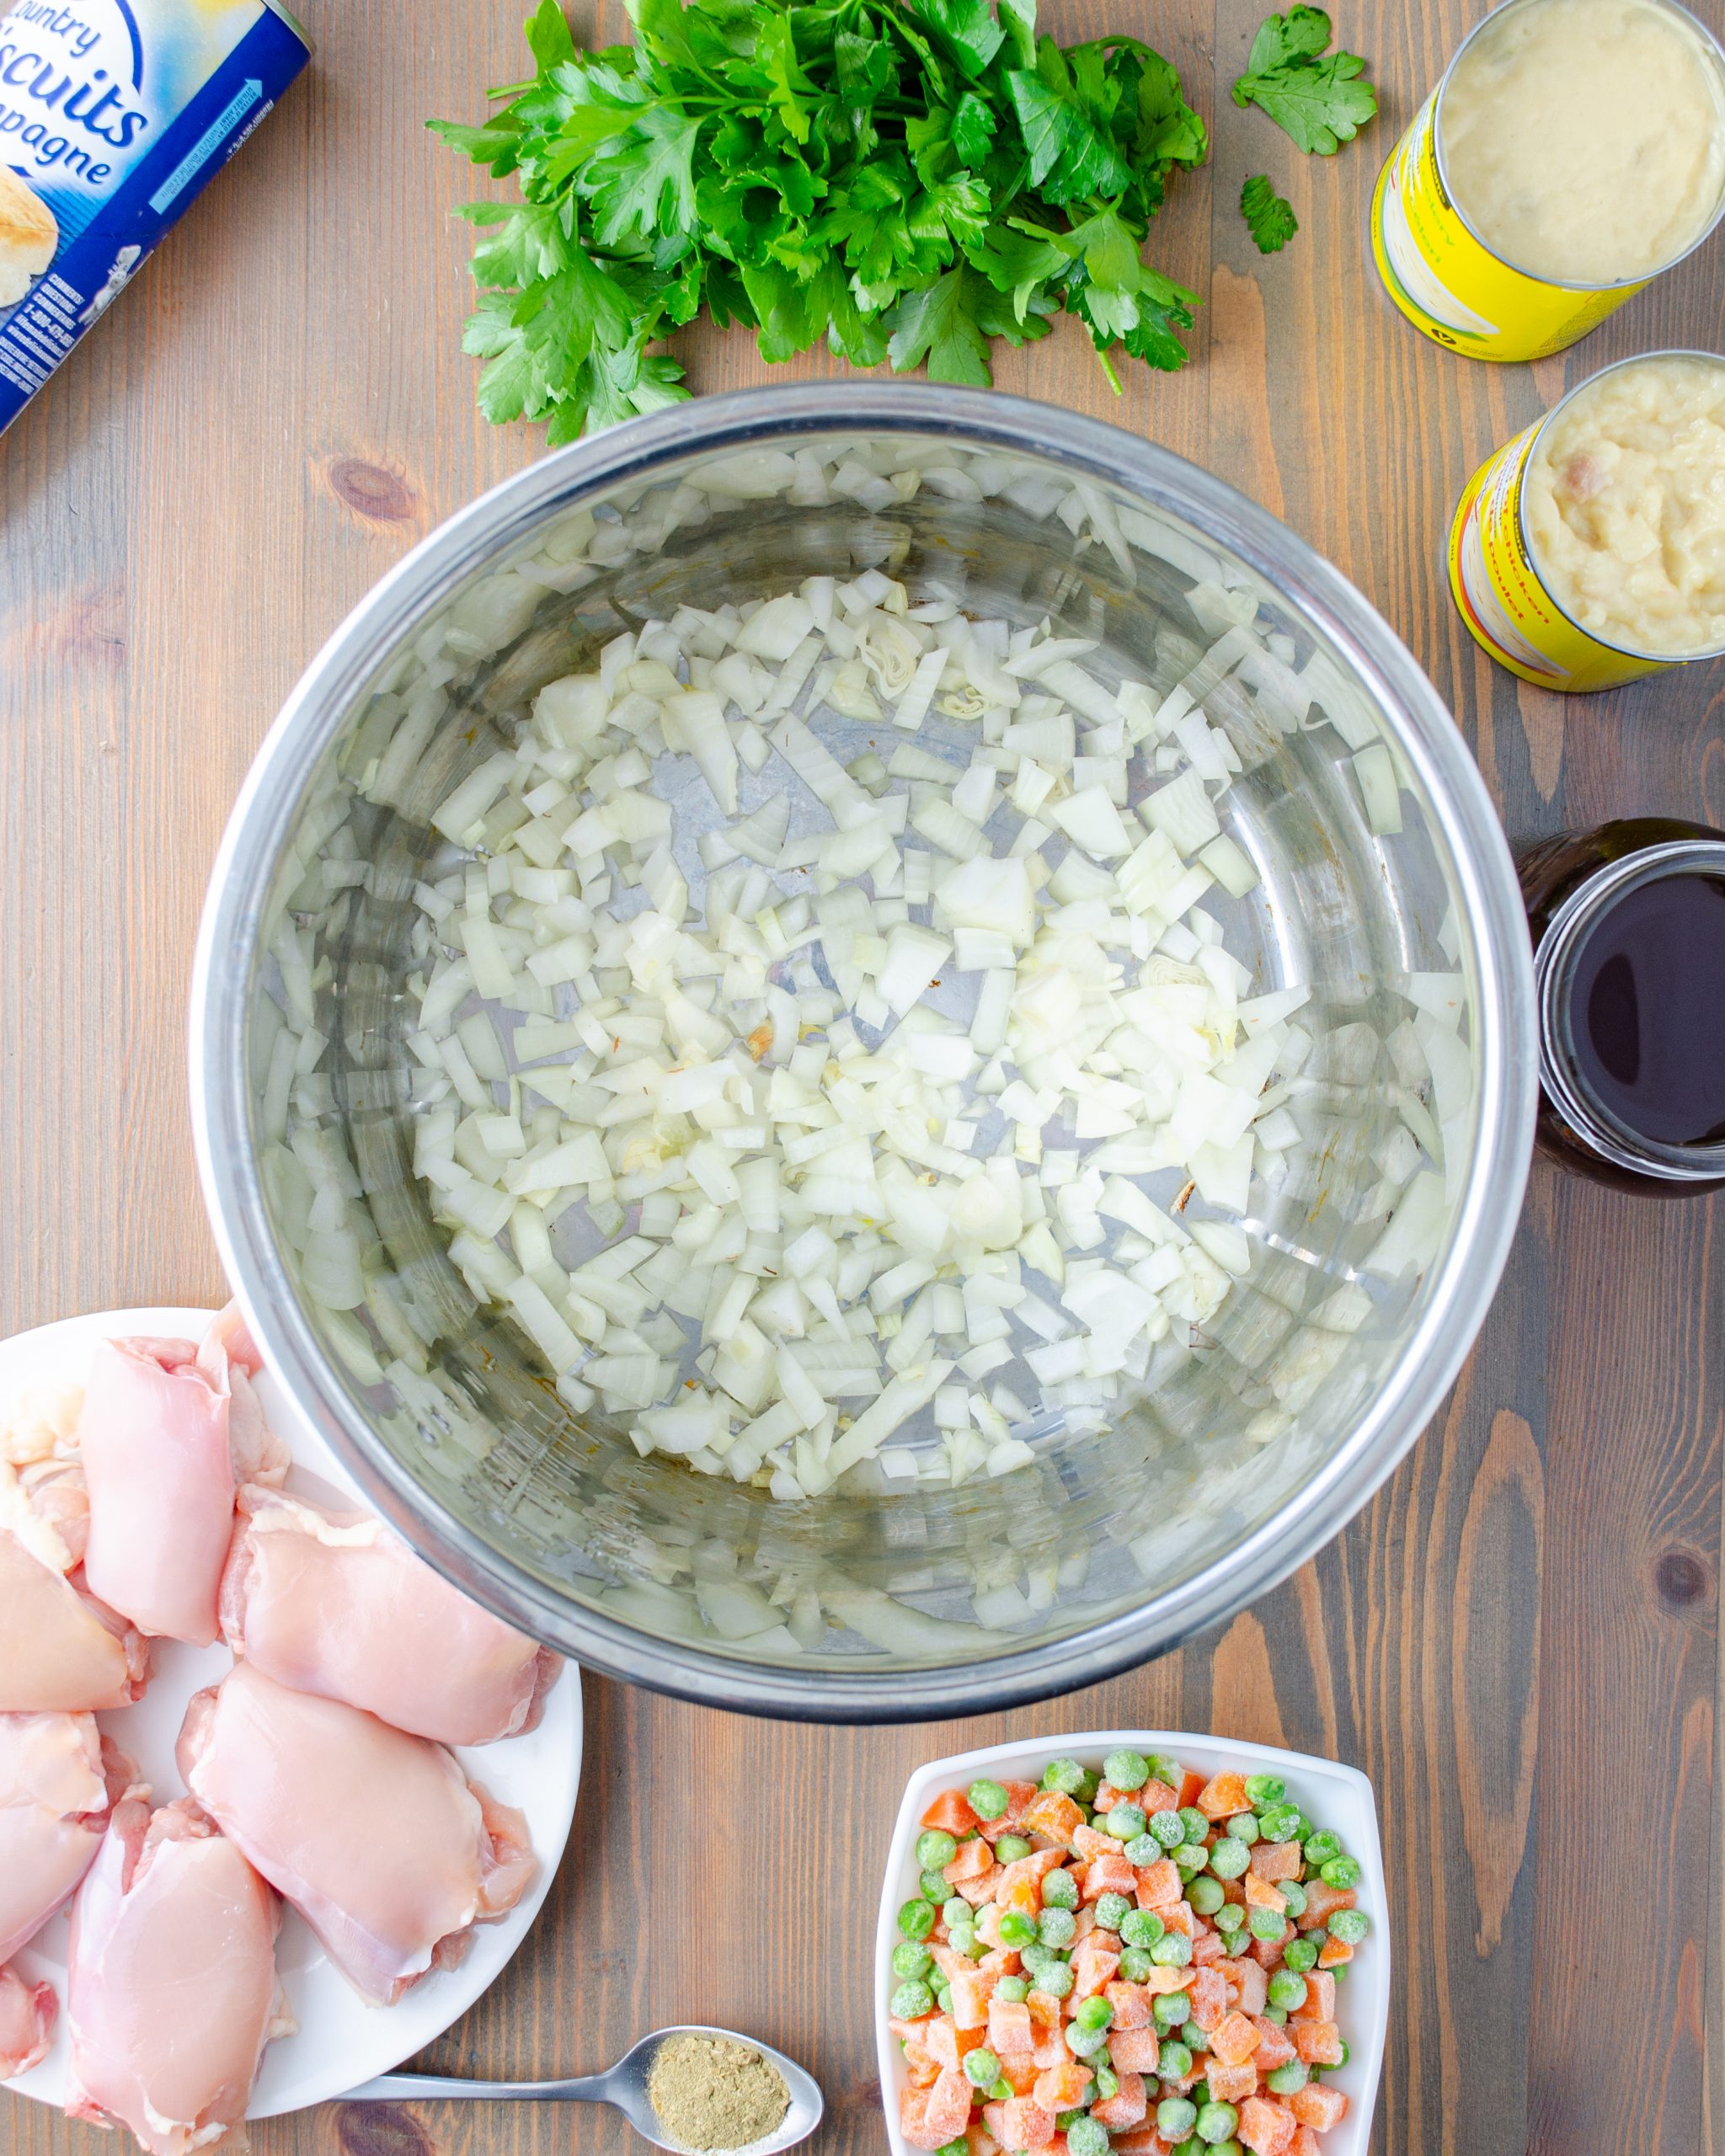 Layer the bottom of the Crock Pot with diced onion.